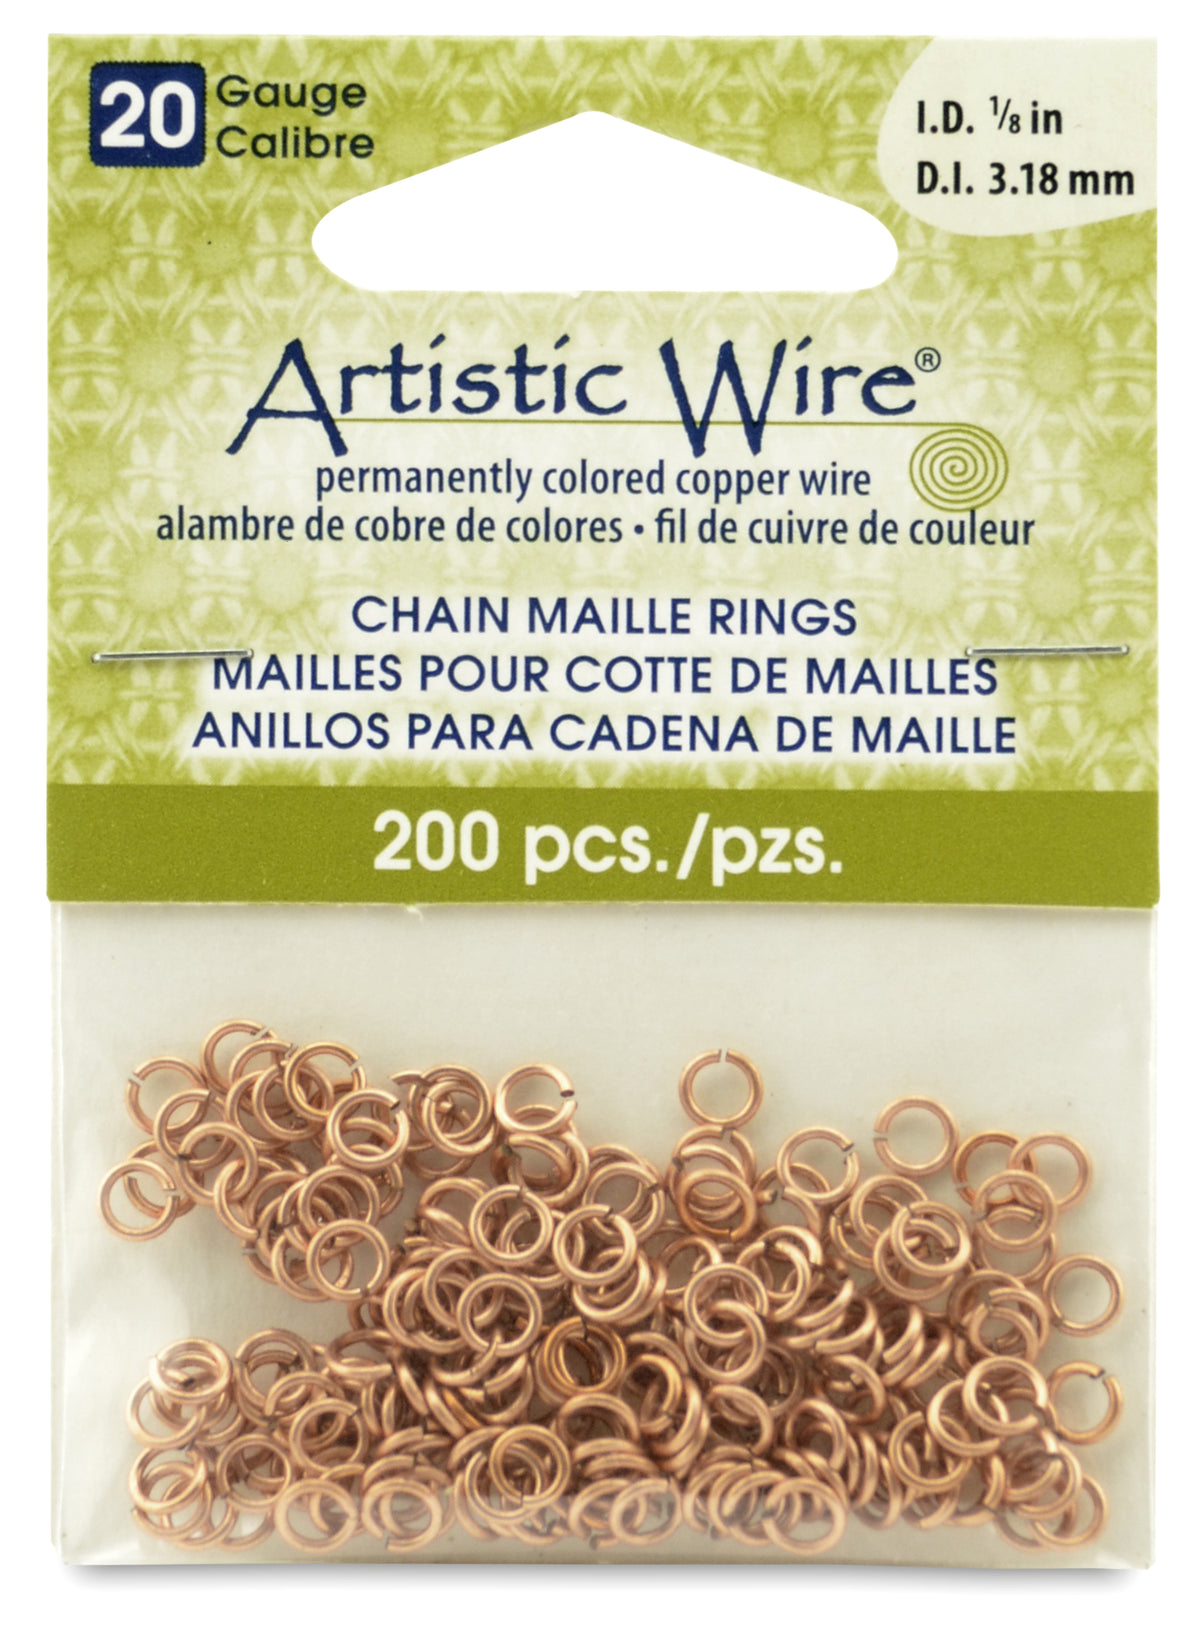 20 Gauge Artistic Wire, Chain Maille Rings, Round, Natural, 1/8 in (3.18 mm), 200 pc